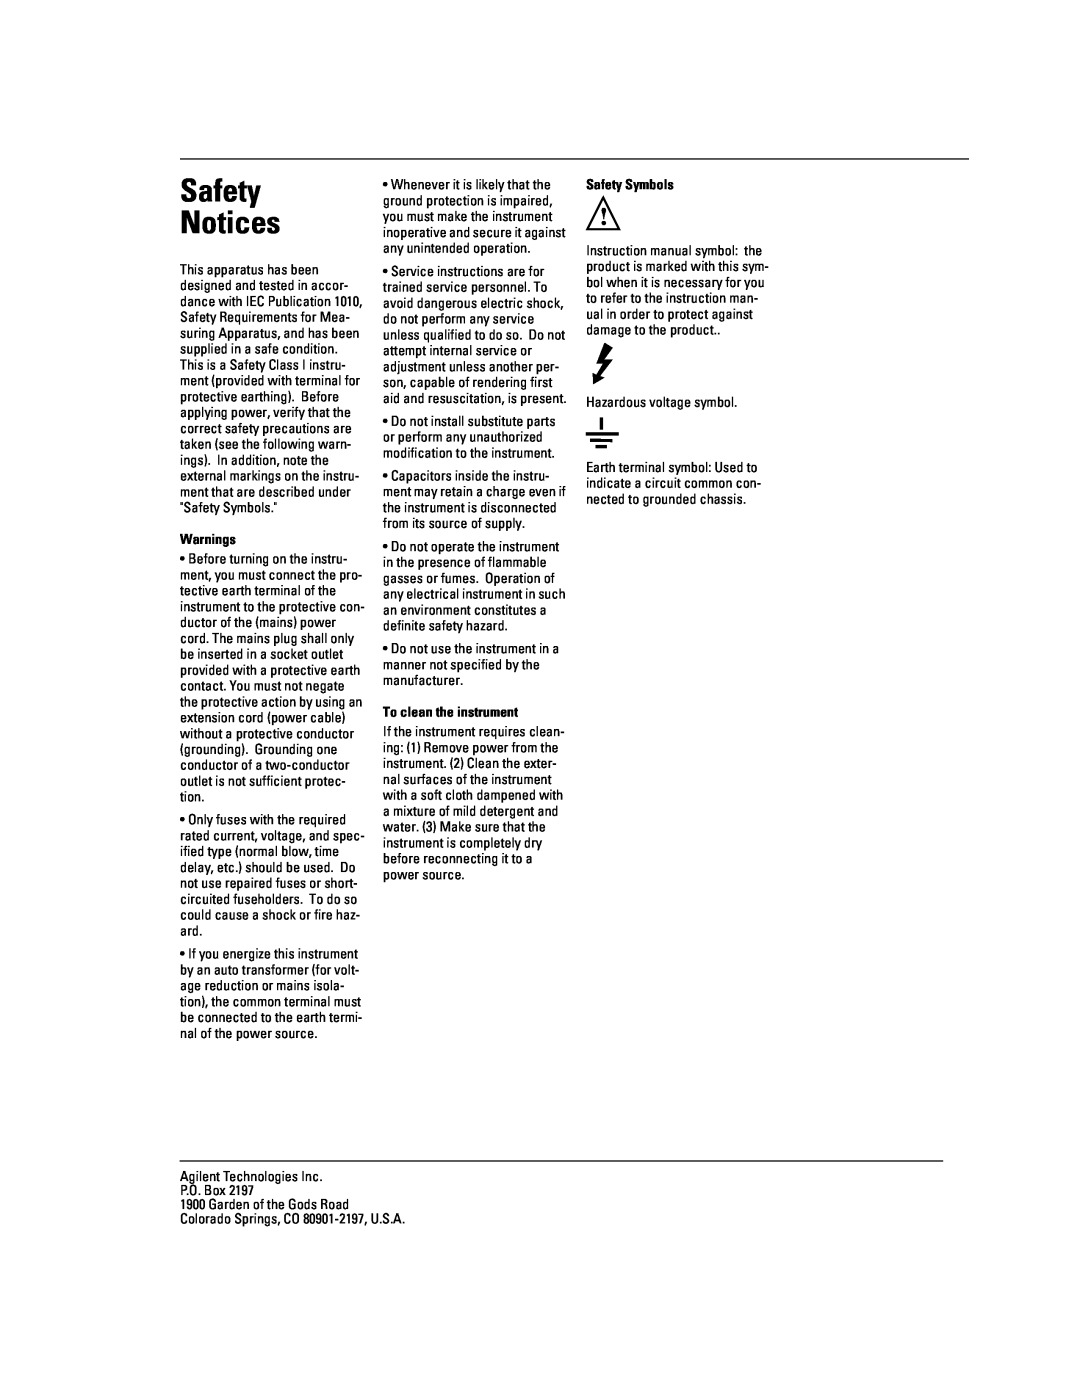 Agilent Technologies 54624A Safety Notices, Warnings, To clean the instrument, Safety Symbols, Hazardous voltage symbol 